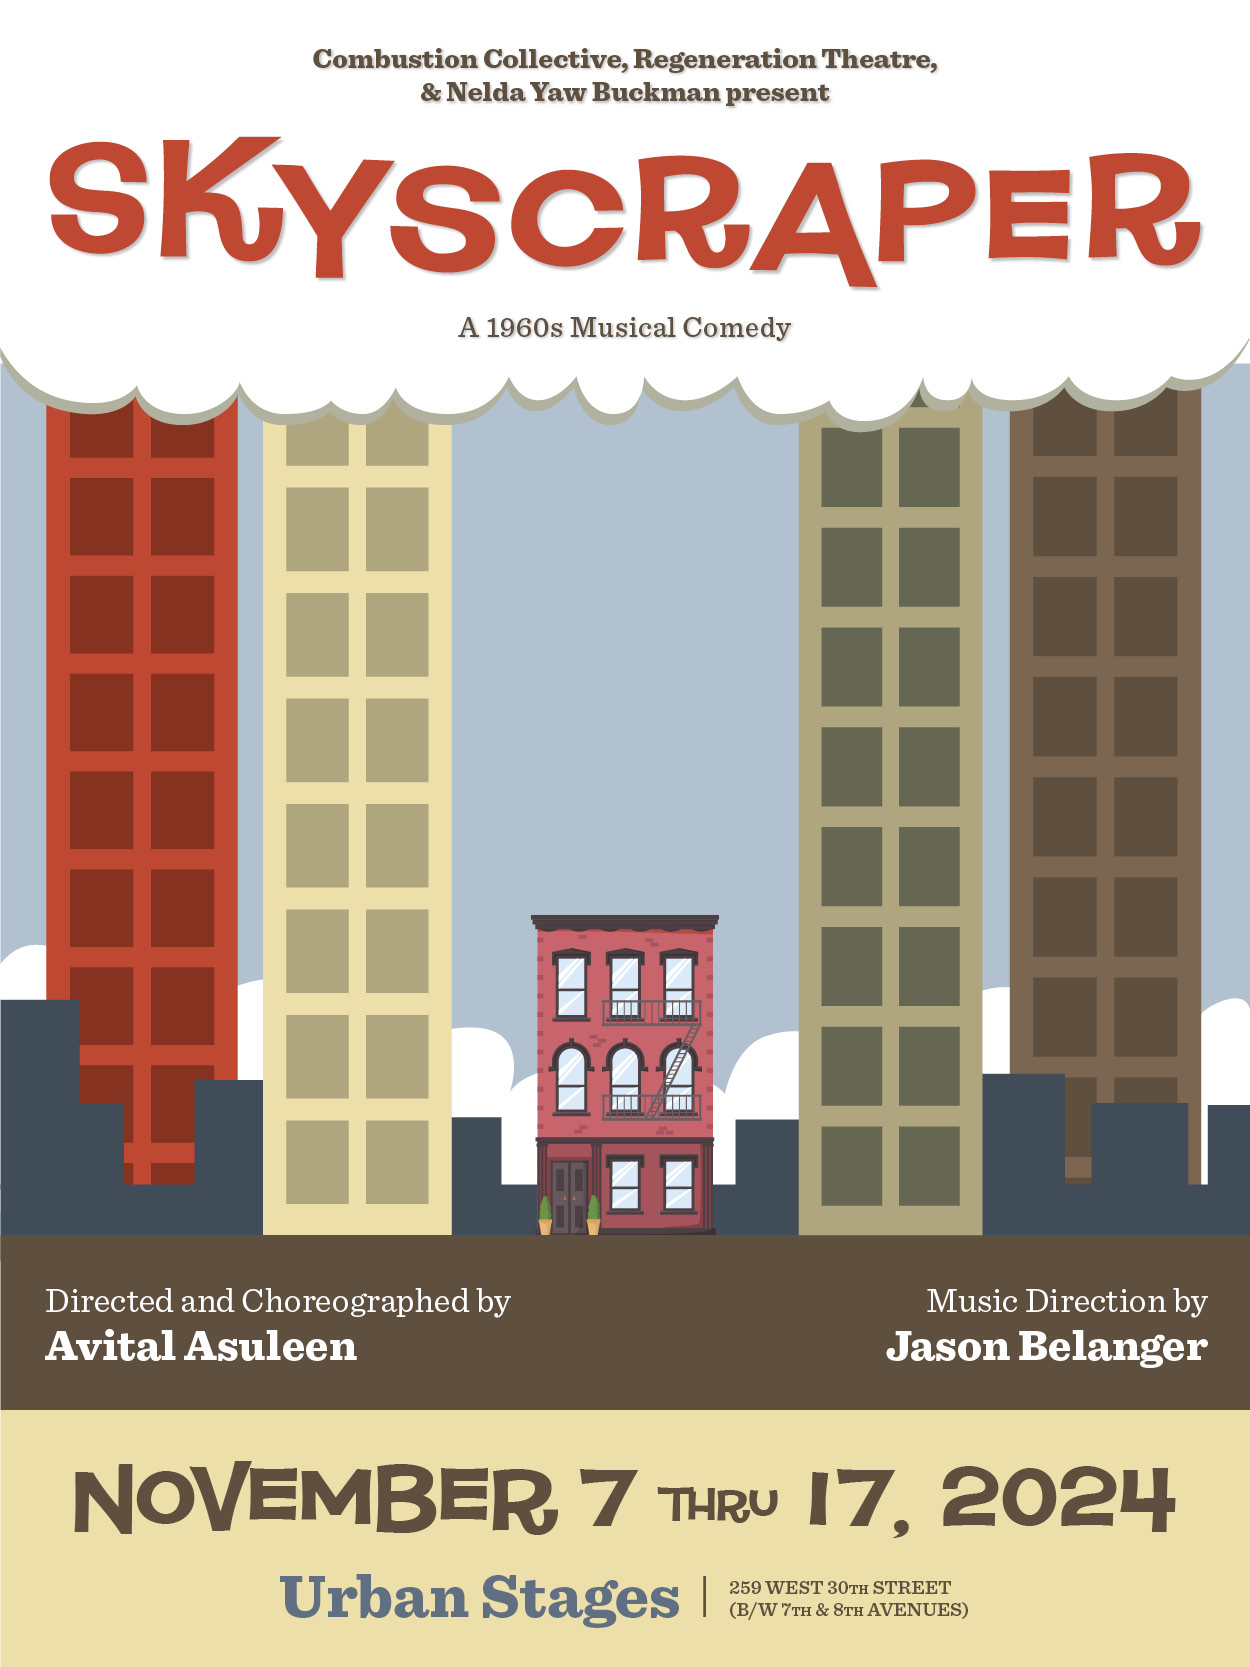 Skyscraper Poster 2024, small brownstone surrounded by skyscrapers